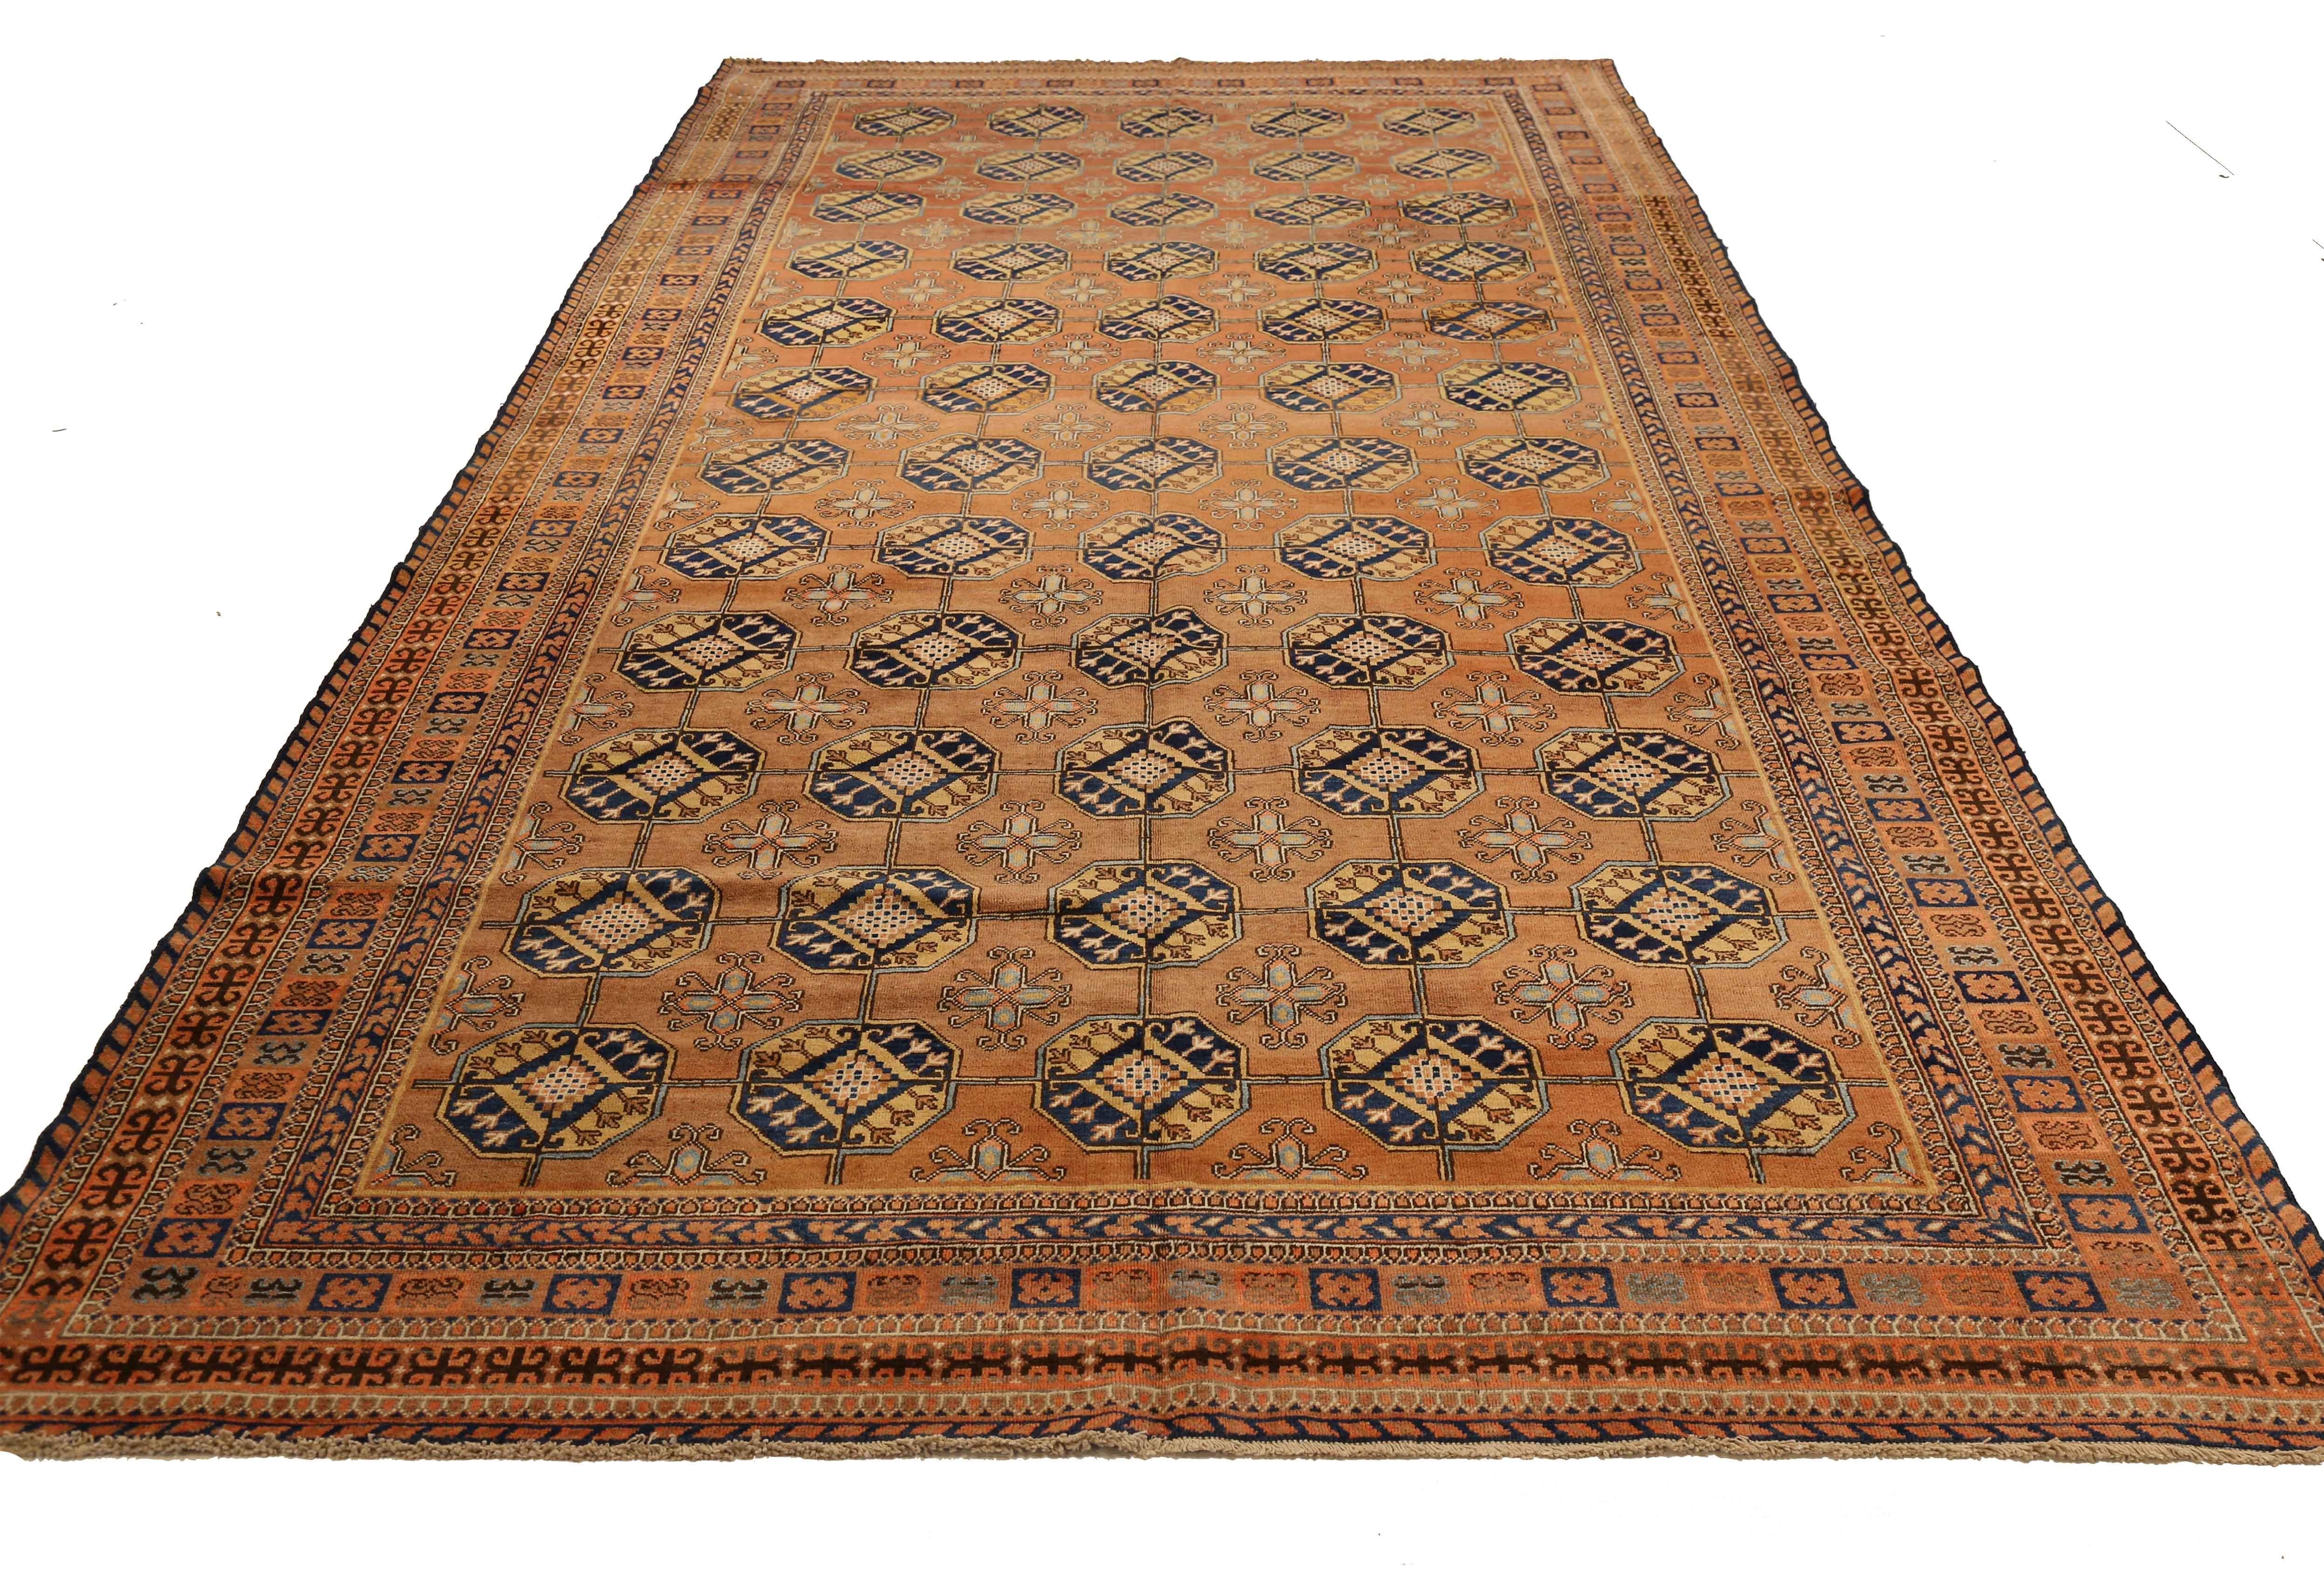 Antique Russian rug handwoven from the finest sheep’s wool and colored with all-natural vegetable dyes that are safe for humans and pets. It’s woven using Khotan design featuring rows of octagon shaped medallions in navy and beige over orange field.